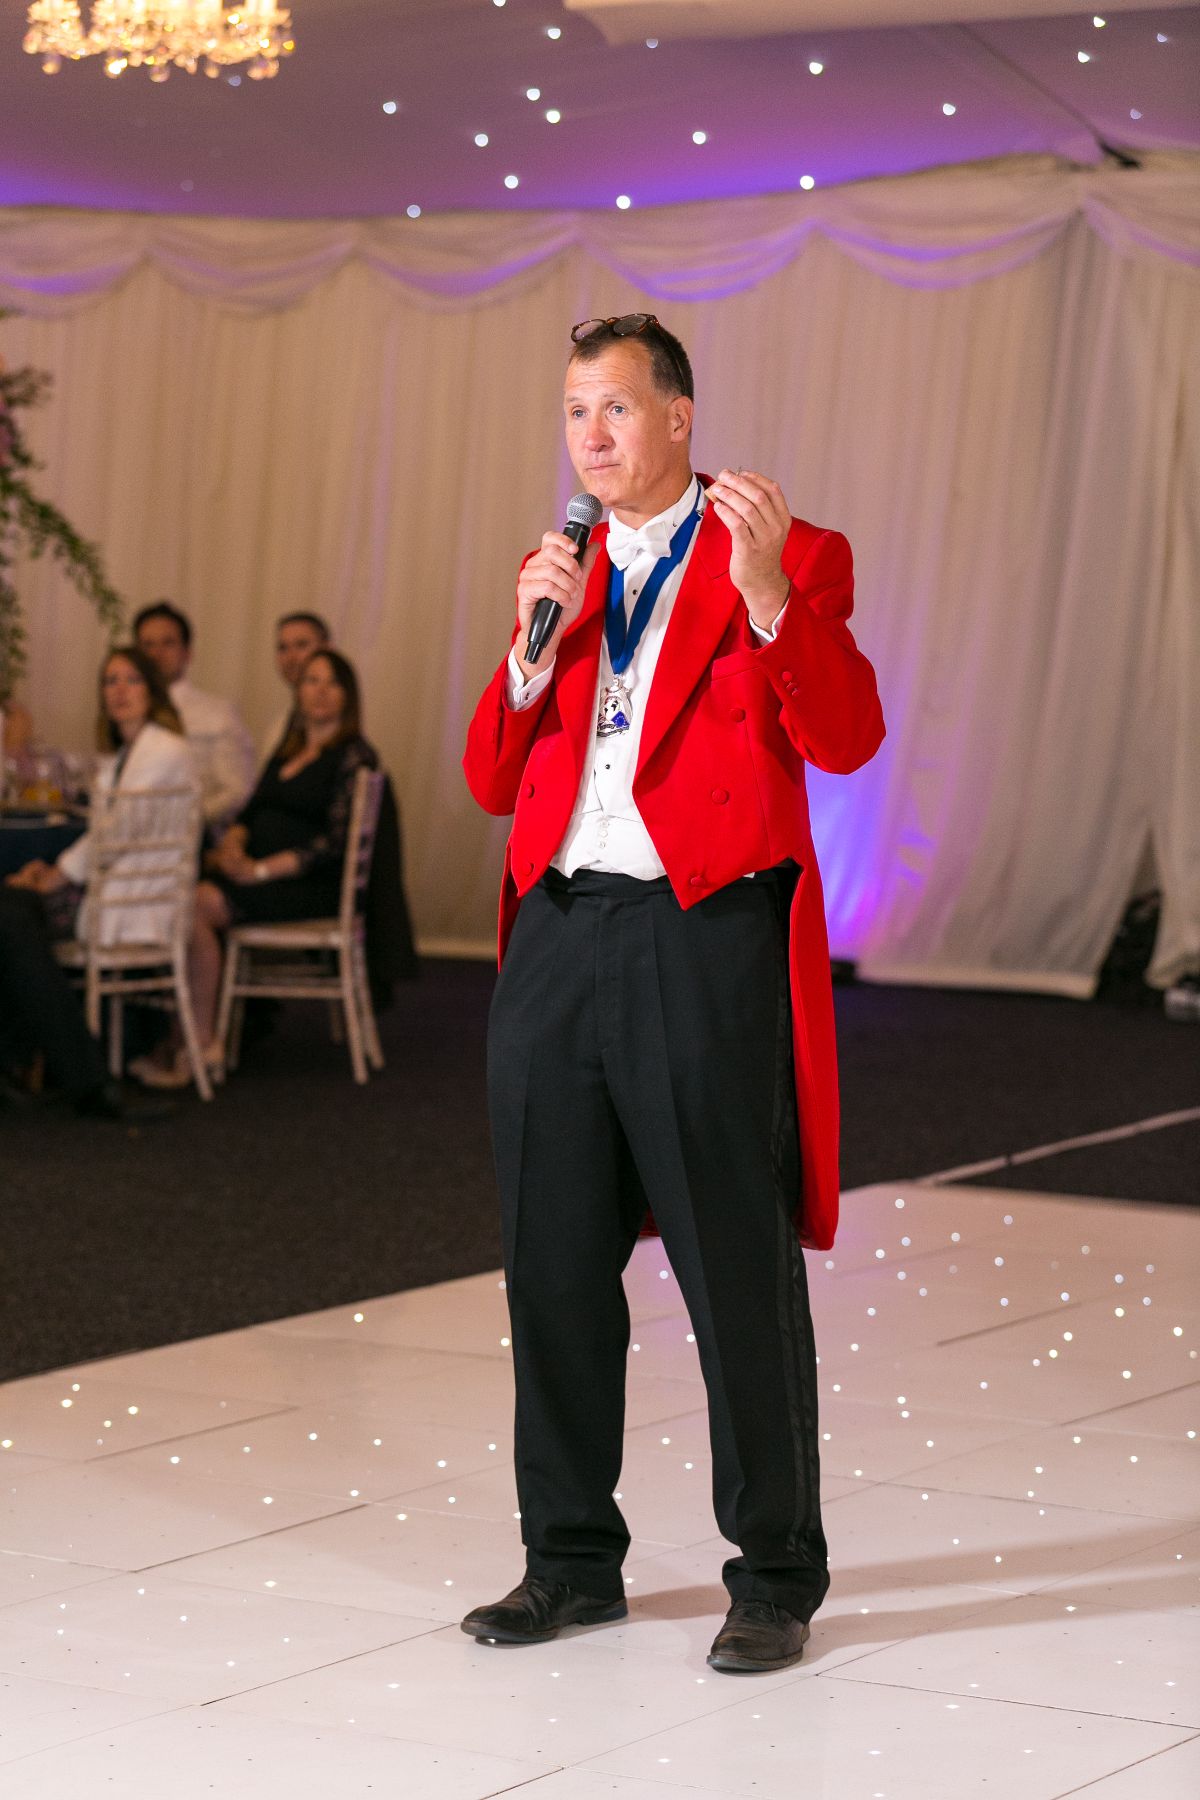 The Man in the Red Coat - Toastmaster James Hasler-Image-6